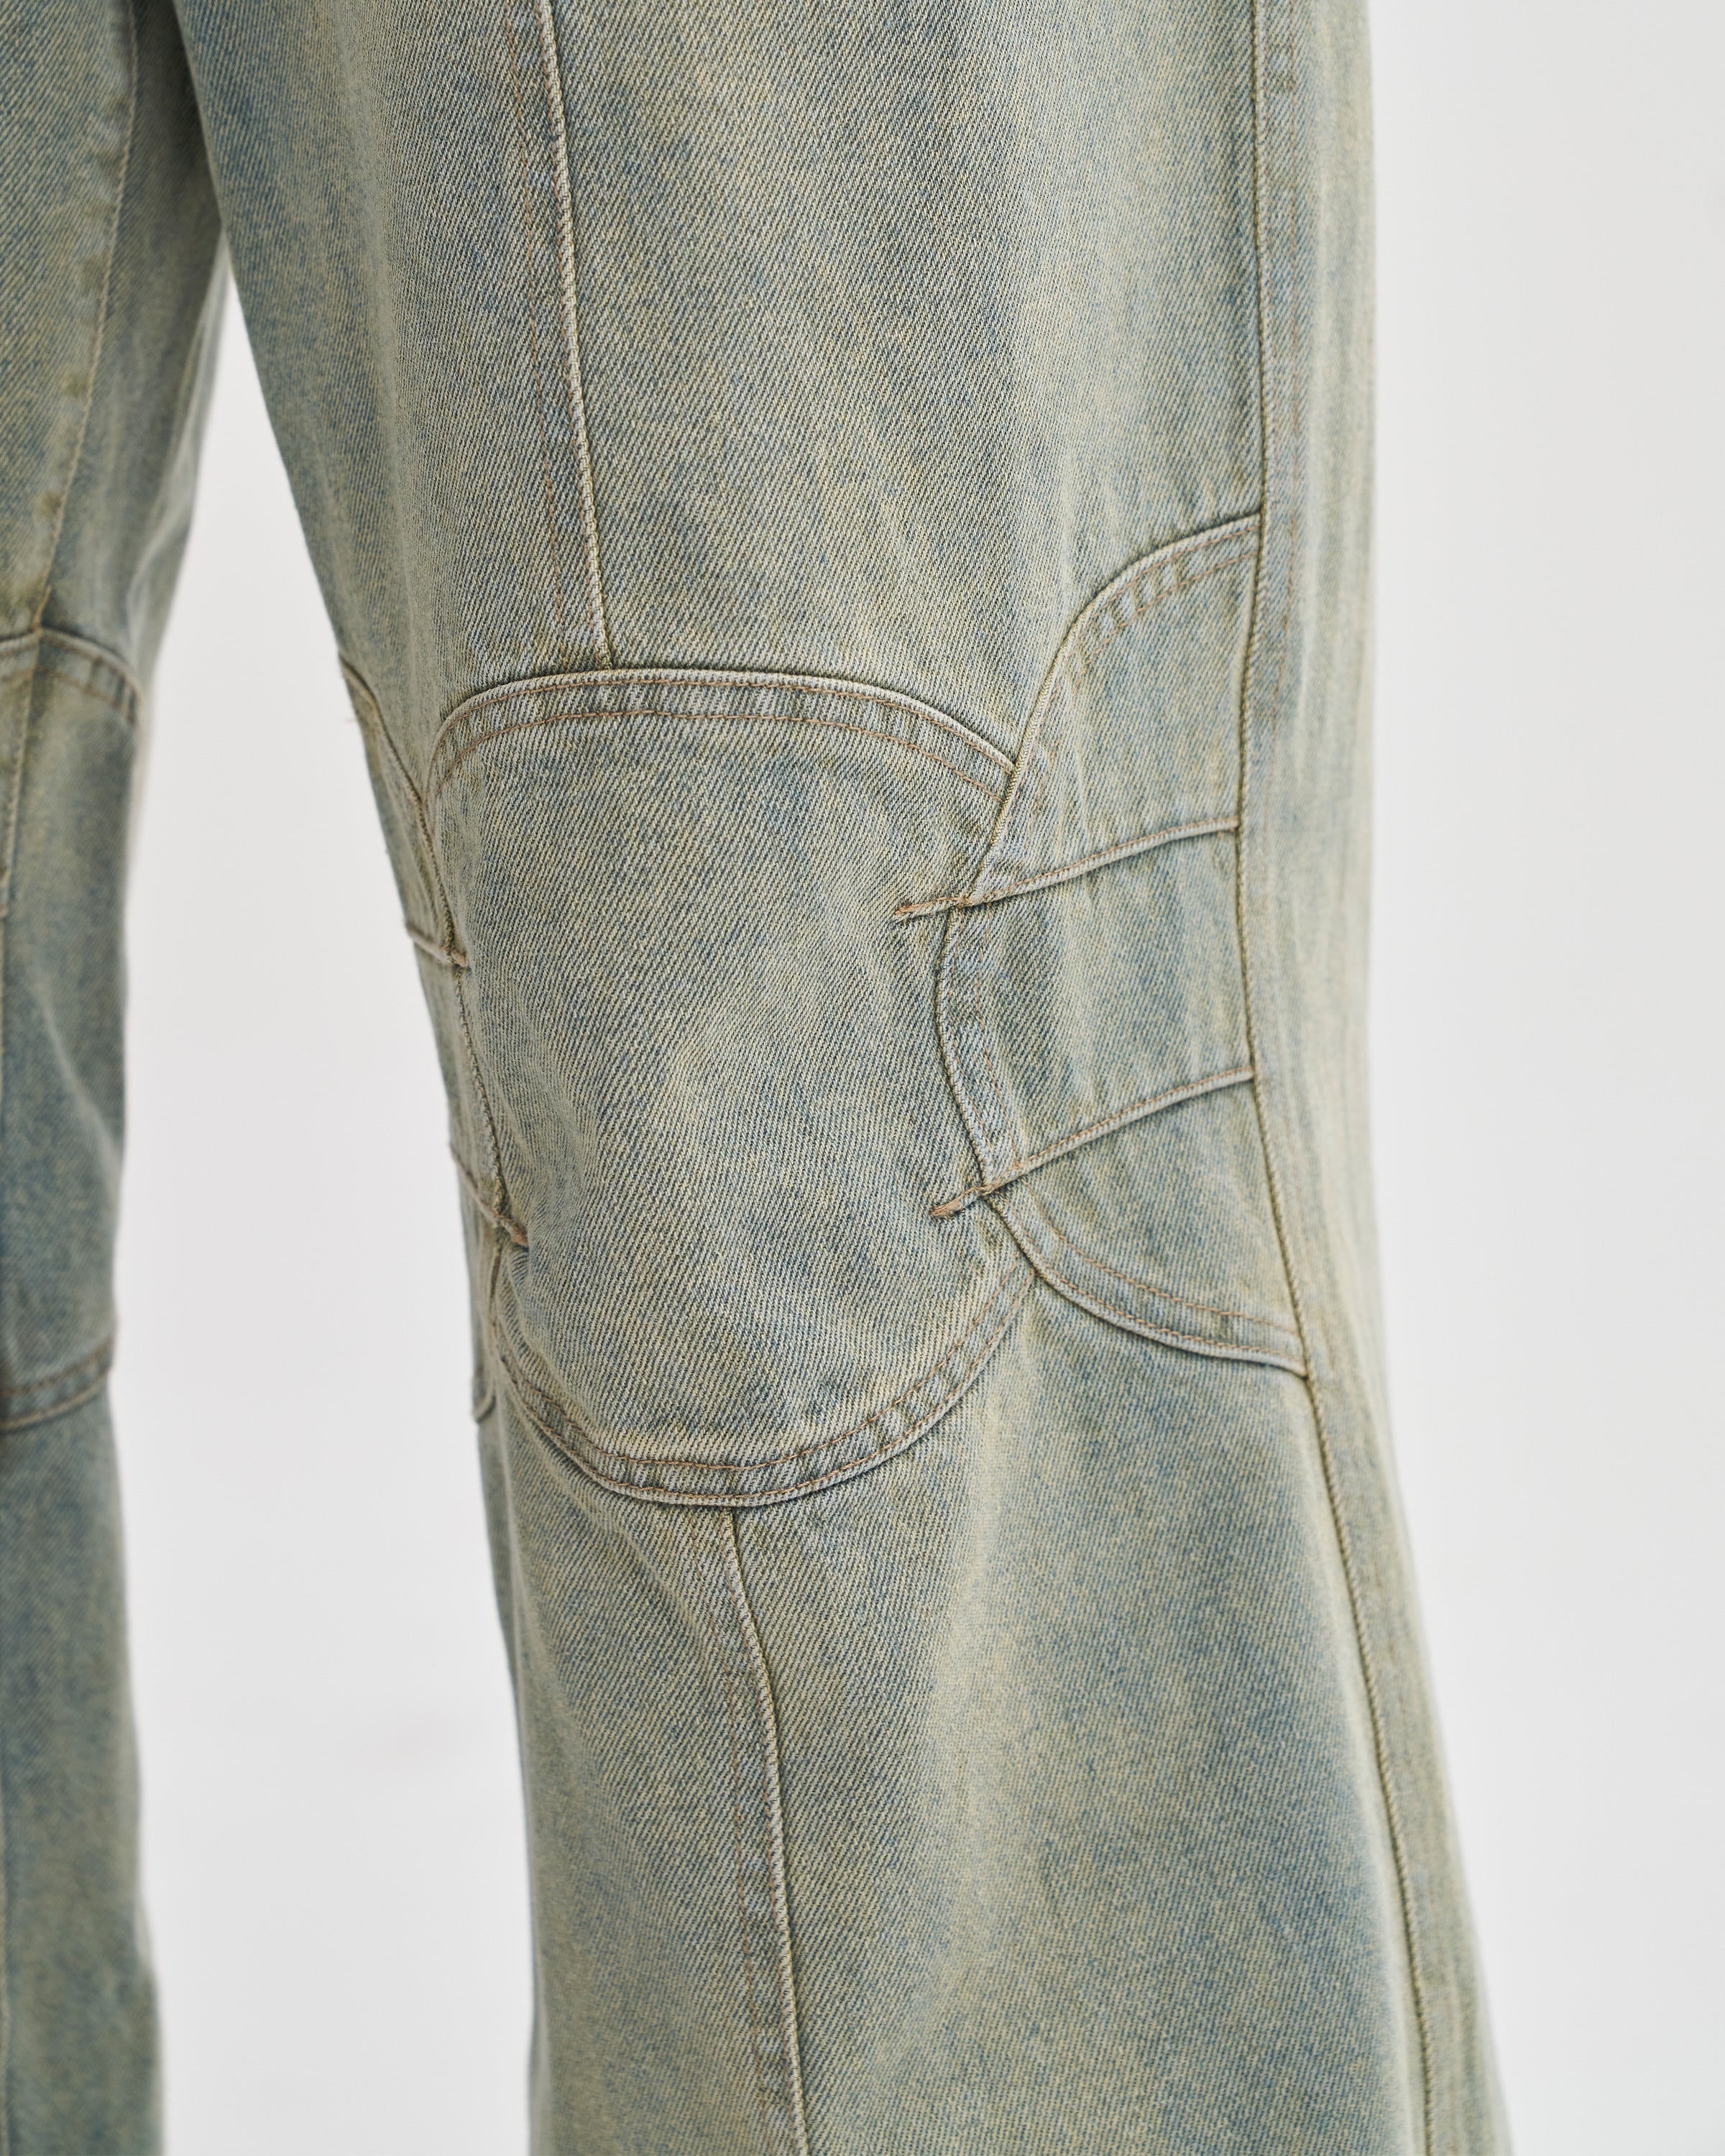 Low Rise Carpenter Baggy Jeans in Stonewash Blue